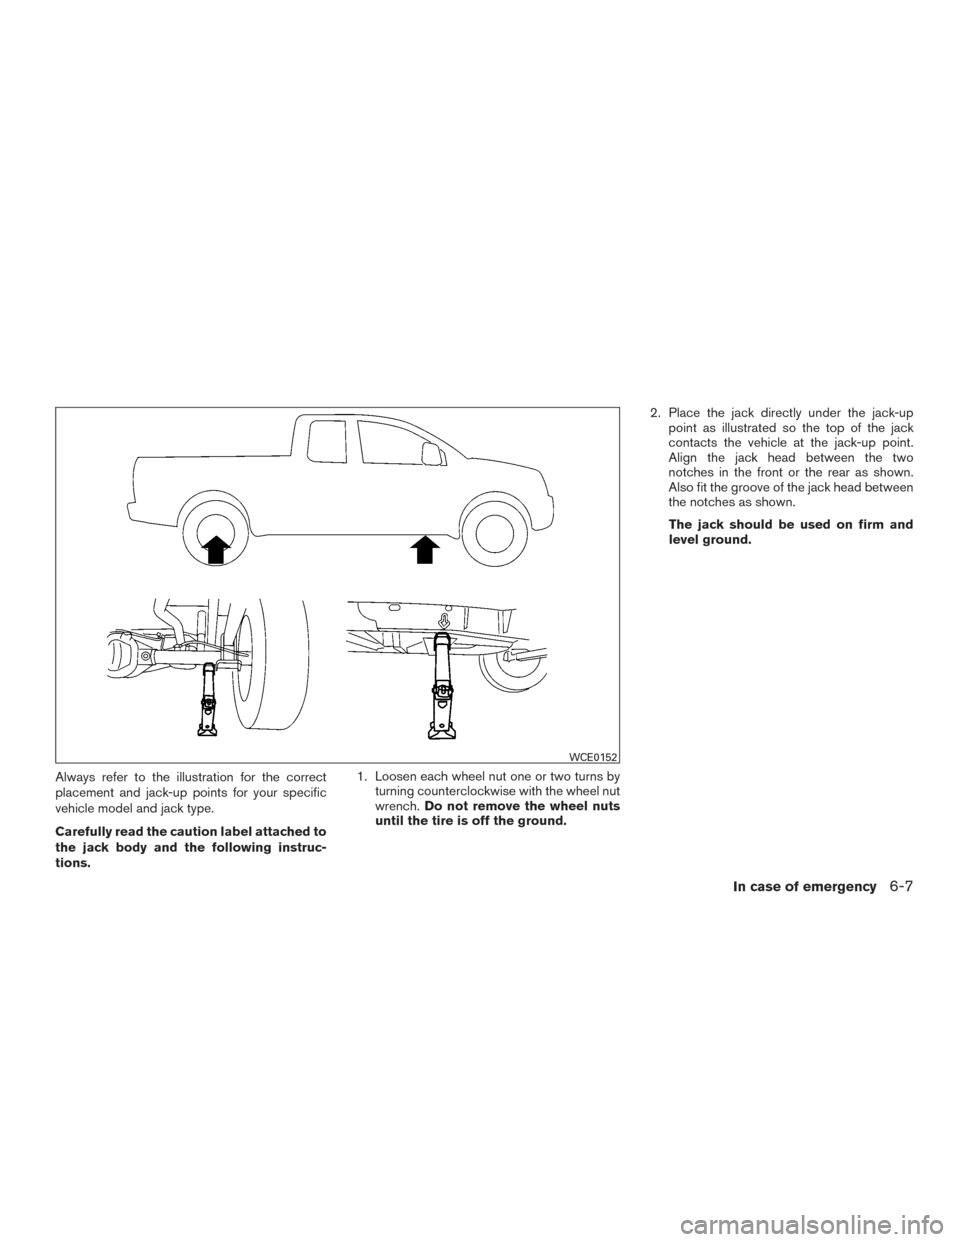 NISSAN TITAN 2016 2.G Owners Manual Always refer to the illustration for the correct
placement and jack-up points for your specific
vehicle model and jack type.
Carefully read the caution label attached to
the jack body and the followin